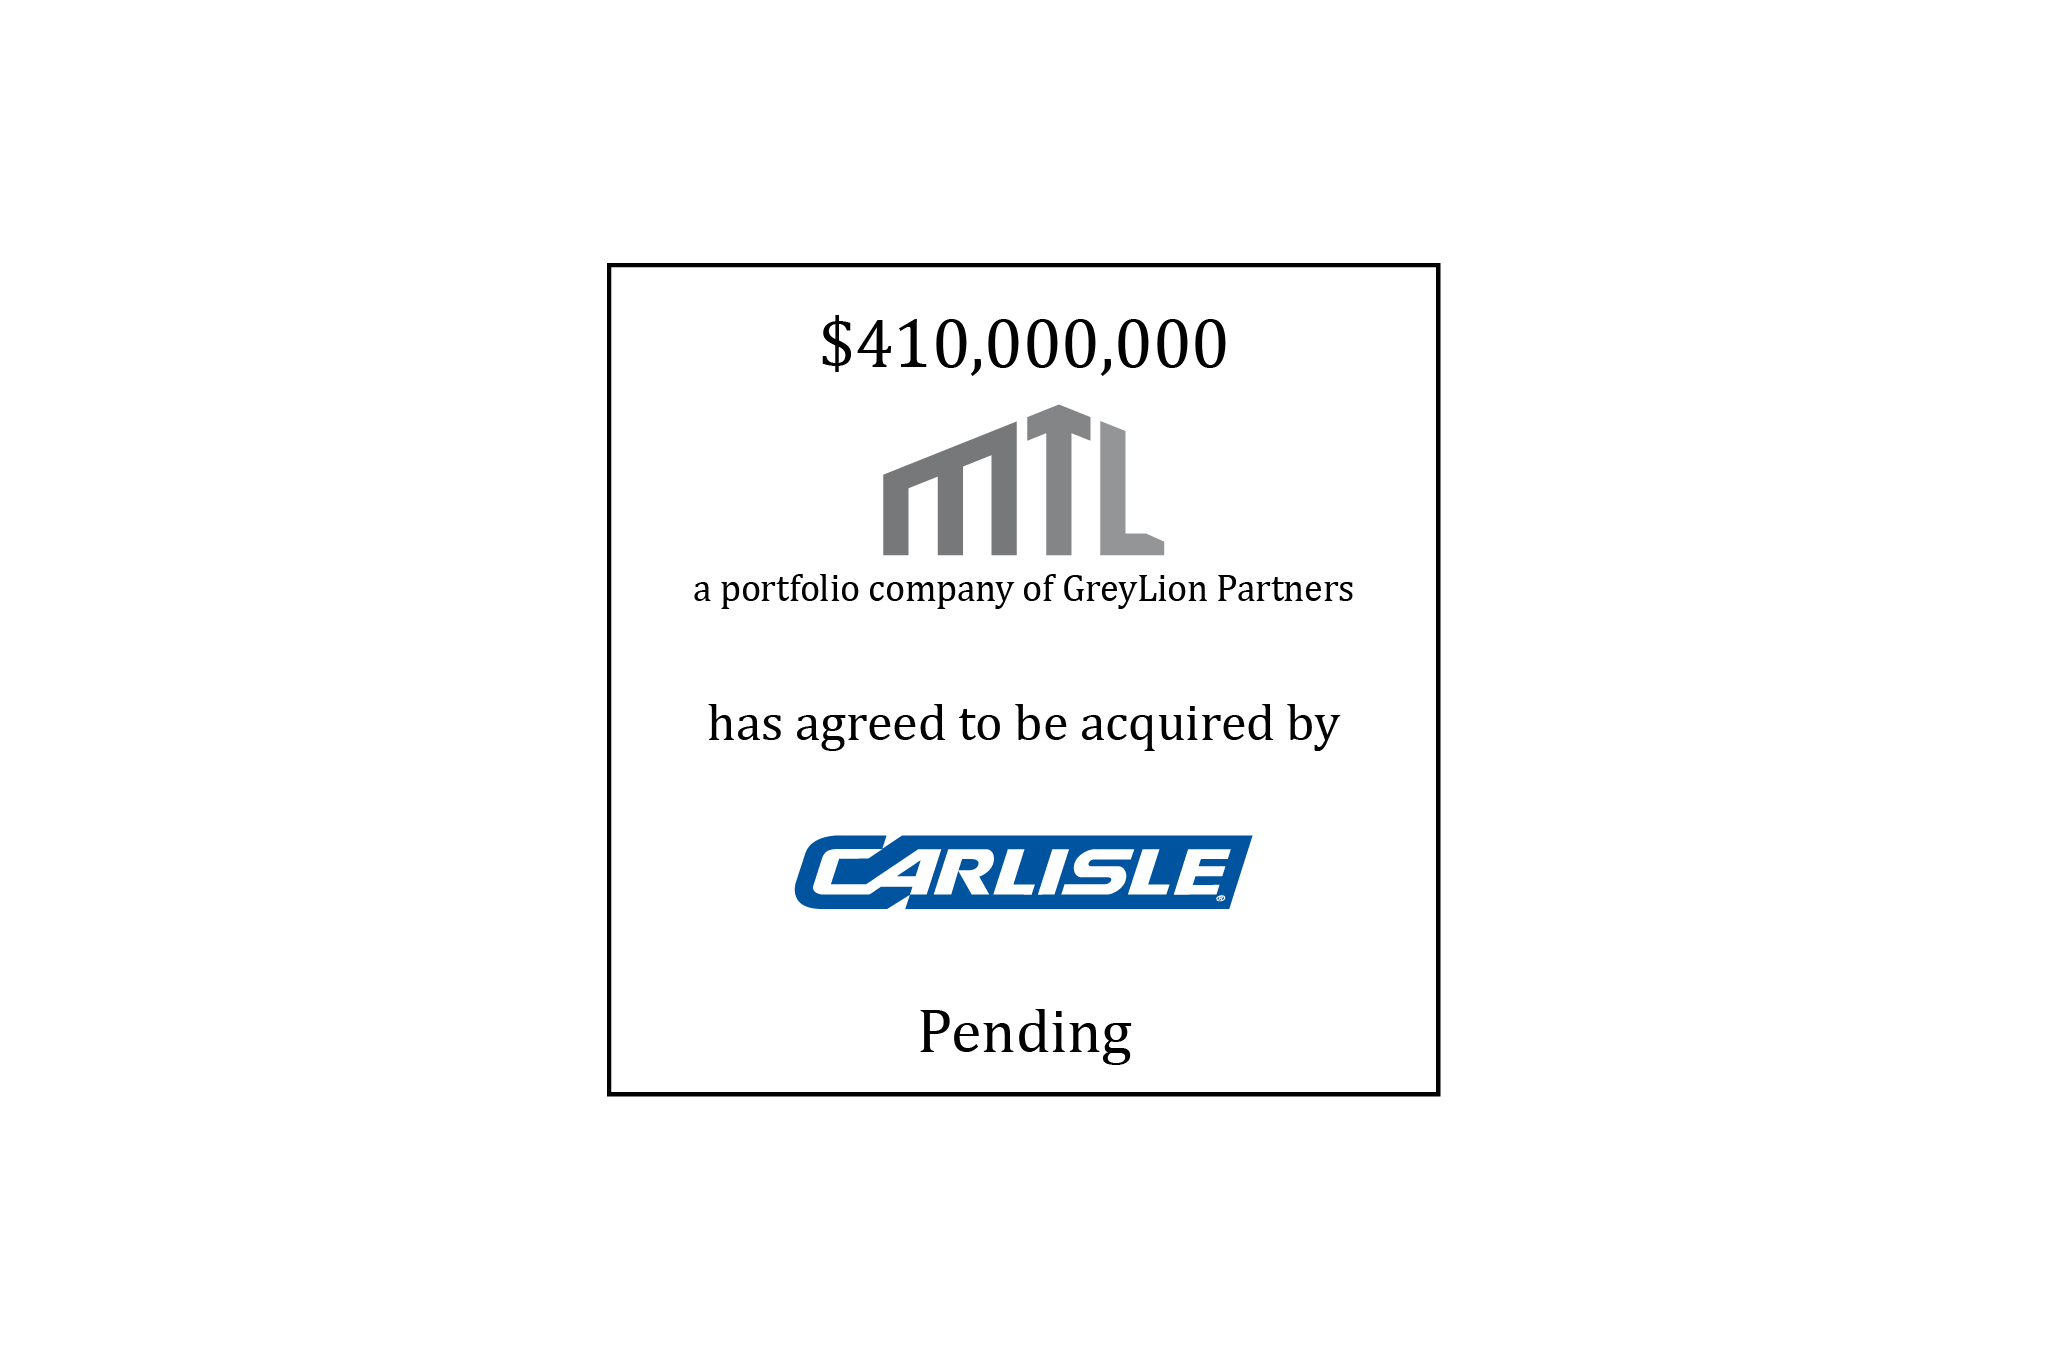 $410,000,000 | MTL a portfolio company of GreyLion Partners has agreed to be acquired by Carlisle | Pending